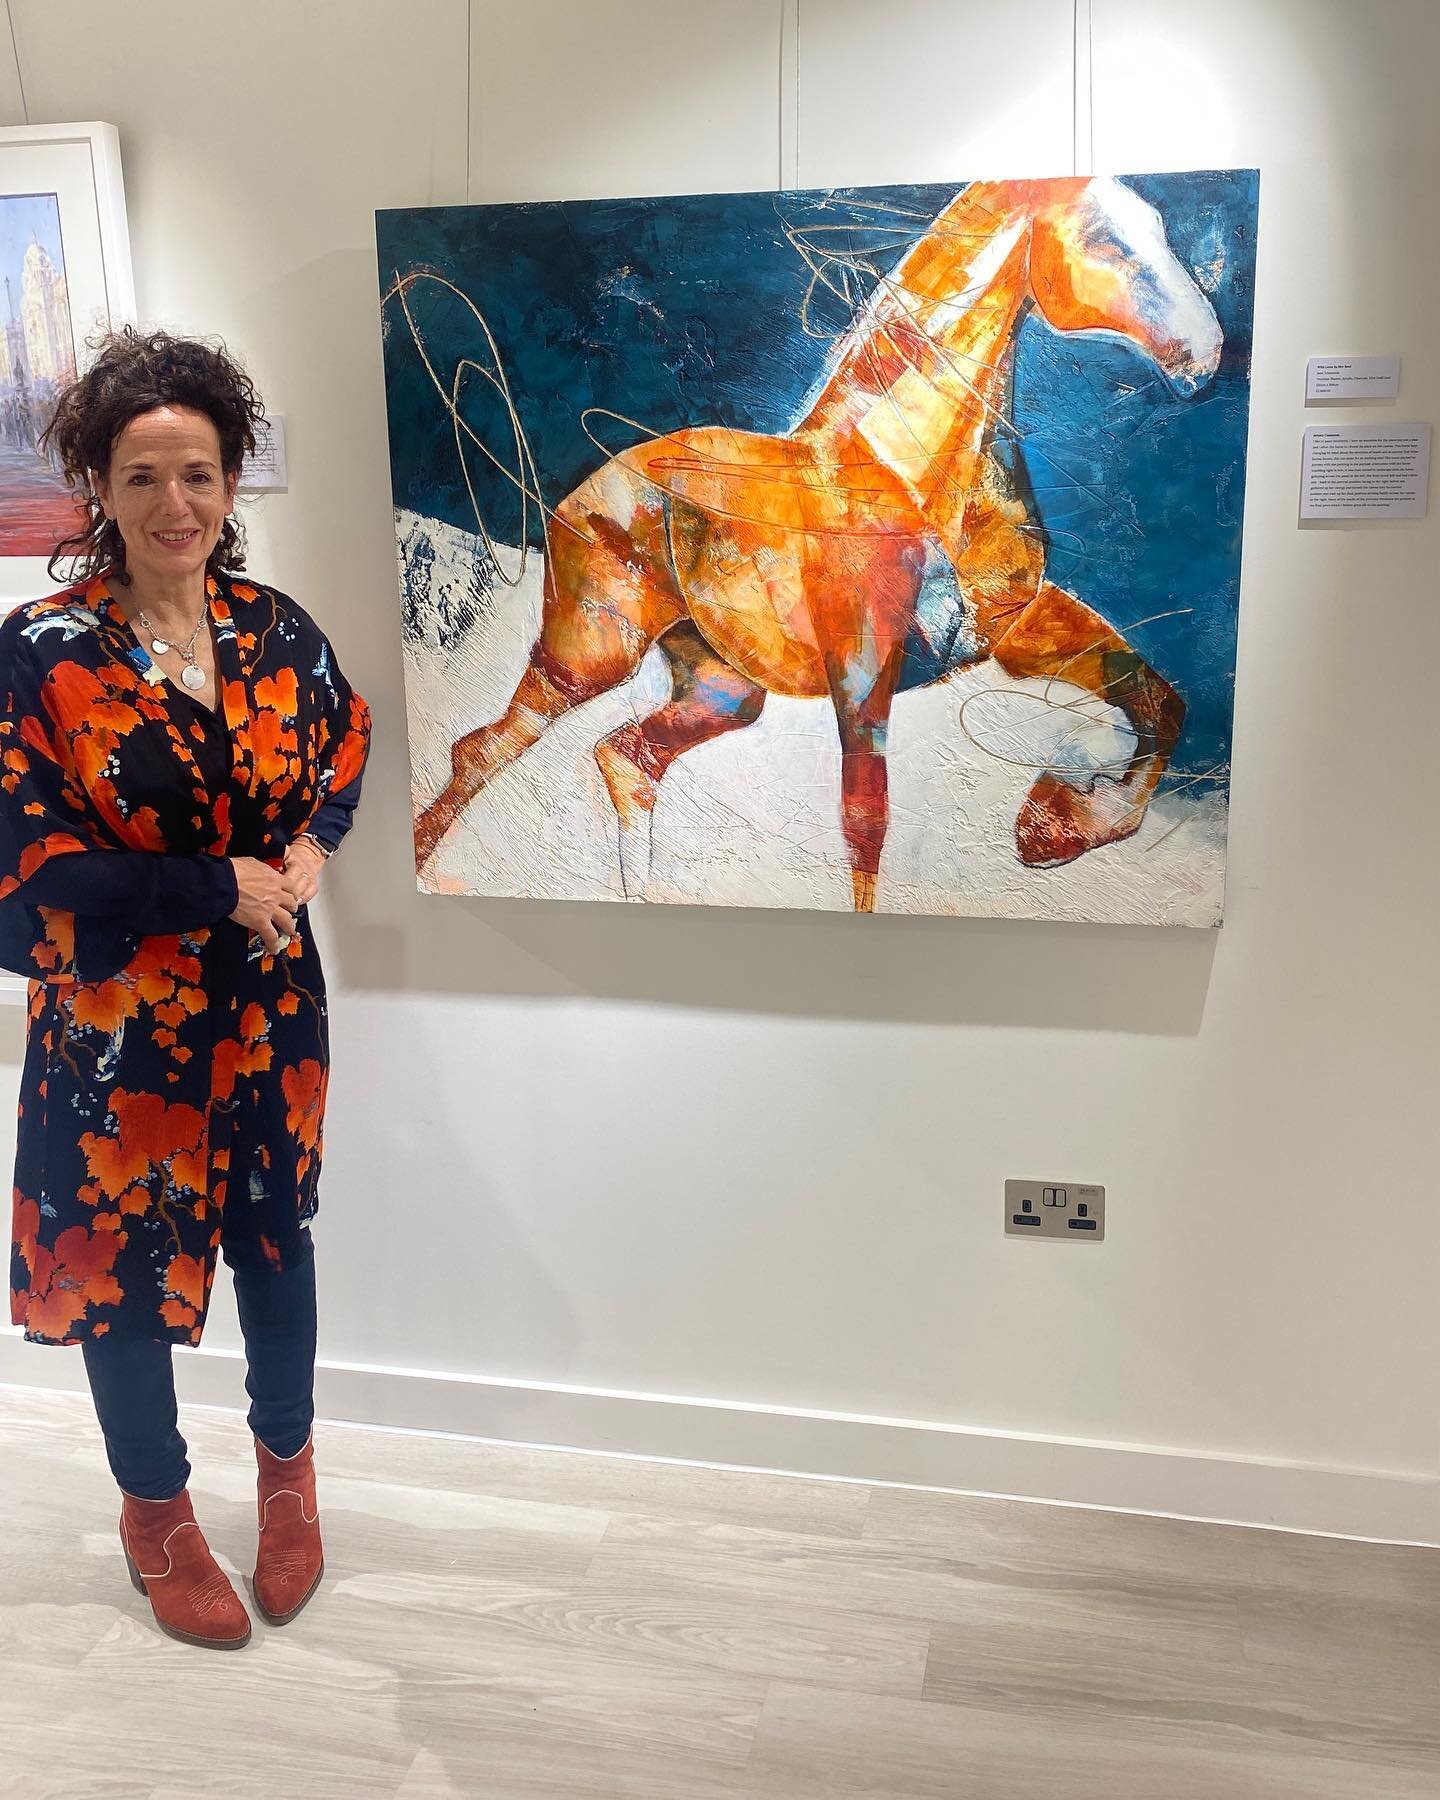 Such a great evening at the Private View of &ldquo;Equine&rdquo; at @rwbviewgallery last night.
Thank you Jen for curating such an excellent show 

It was so great to meet everyone and all the work looked stunning.  It really took my breath away to s